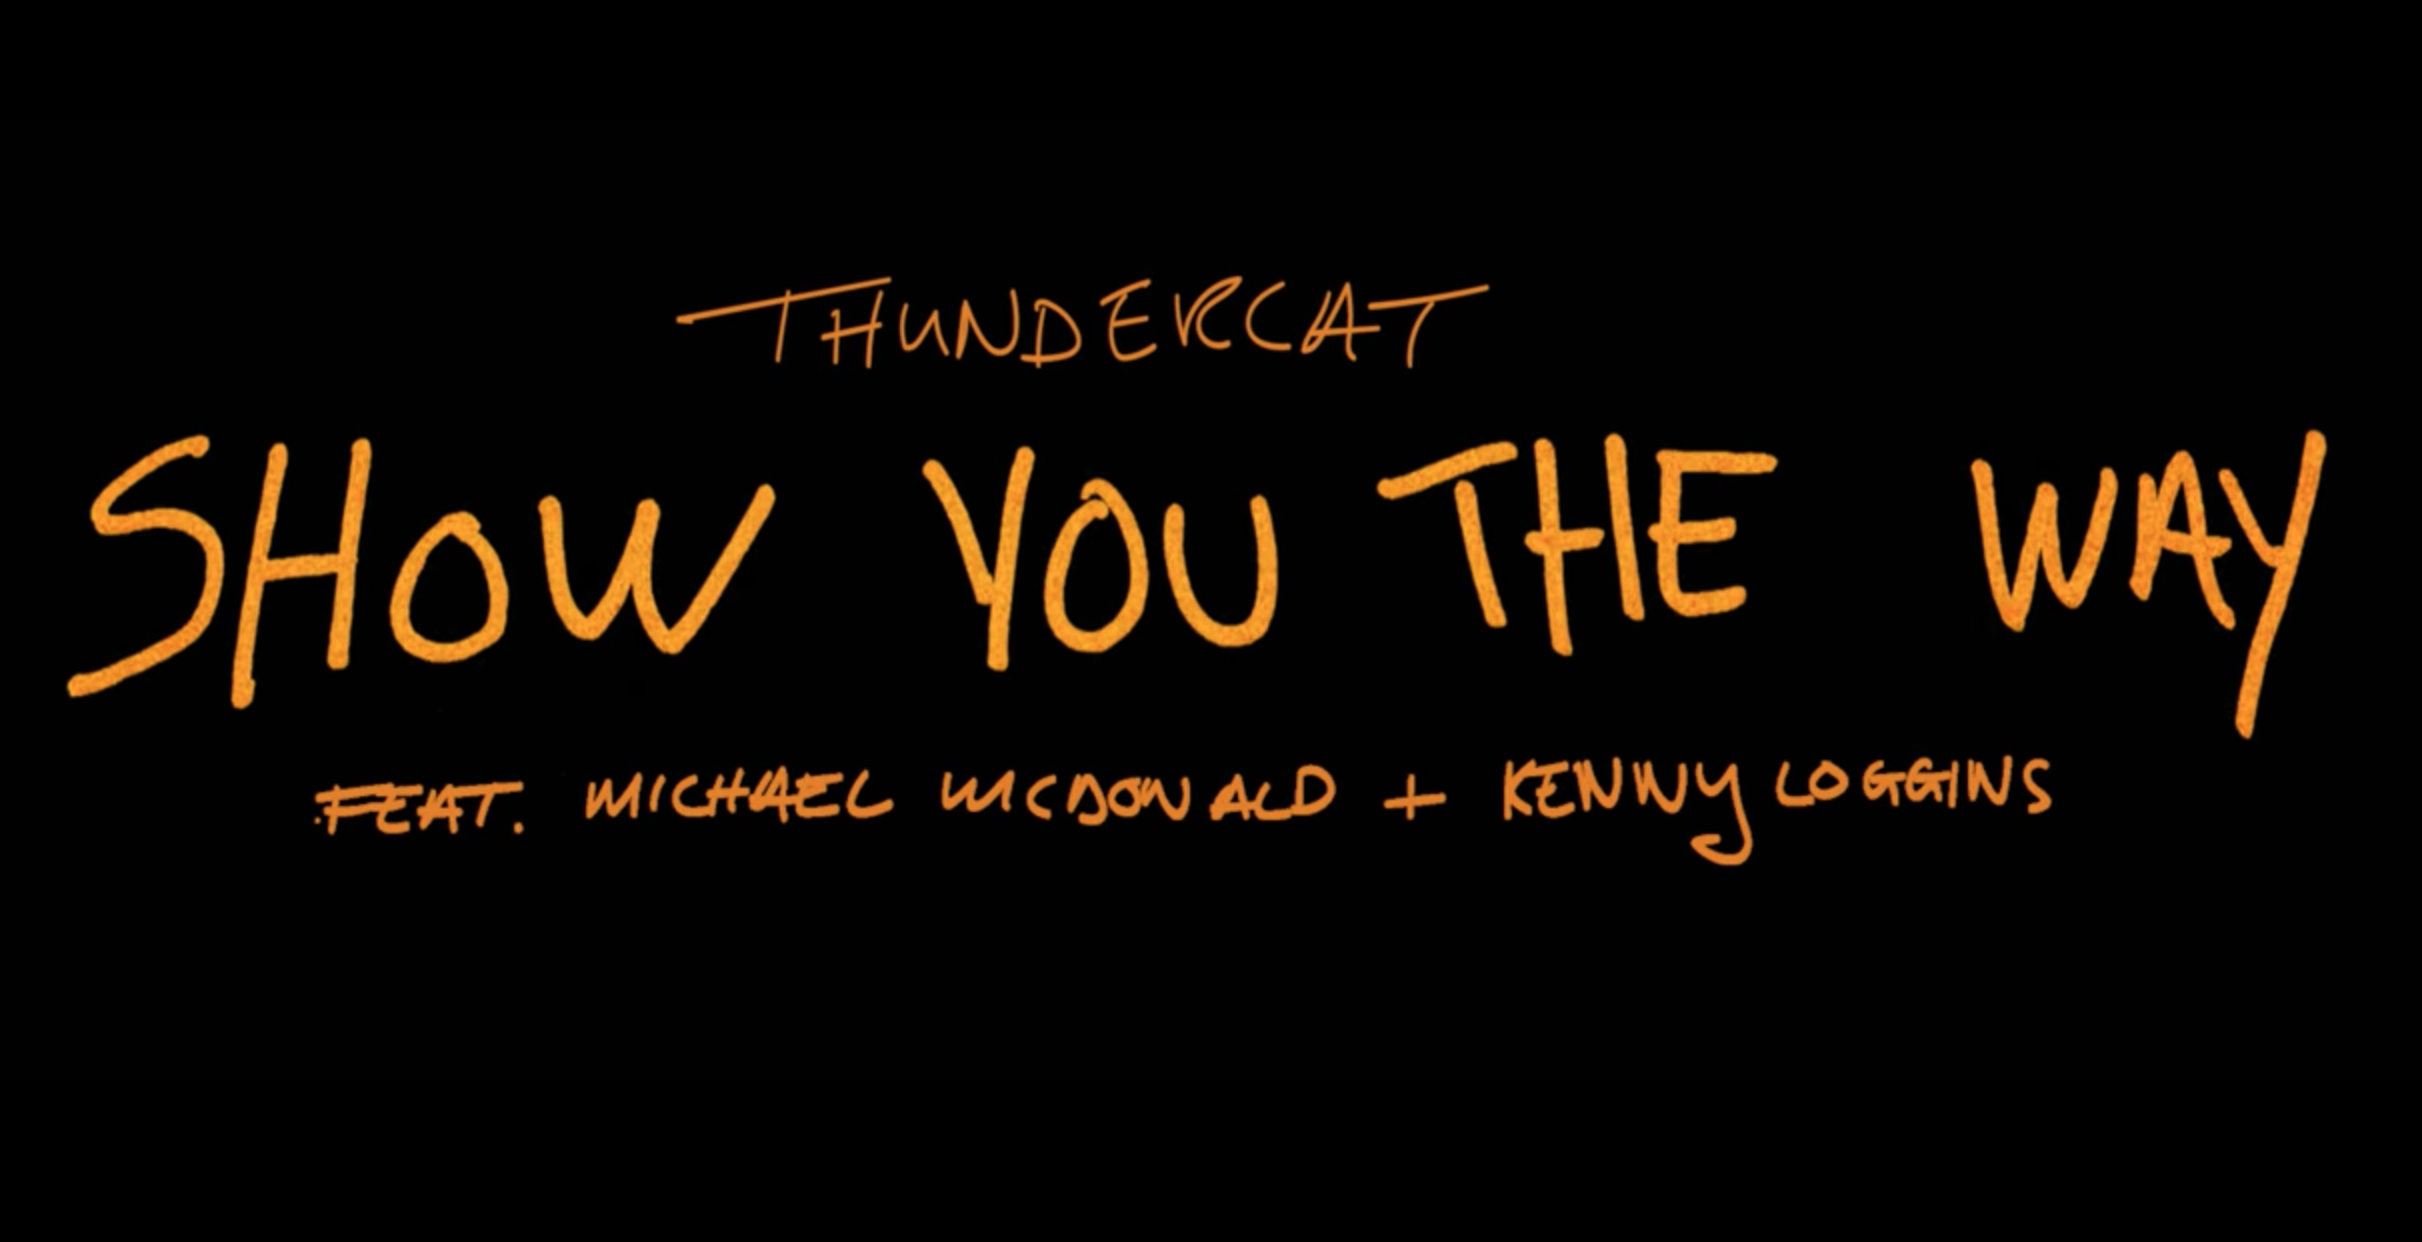 Thundercat - "Show You The Way (feat. Michael McDonald & Kenny Loggins)" (Official Video)